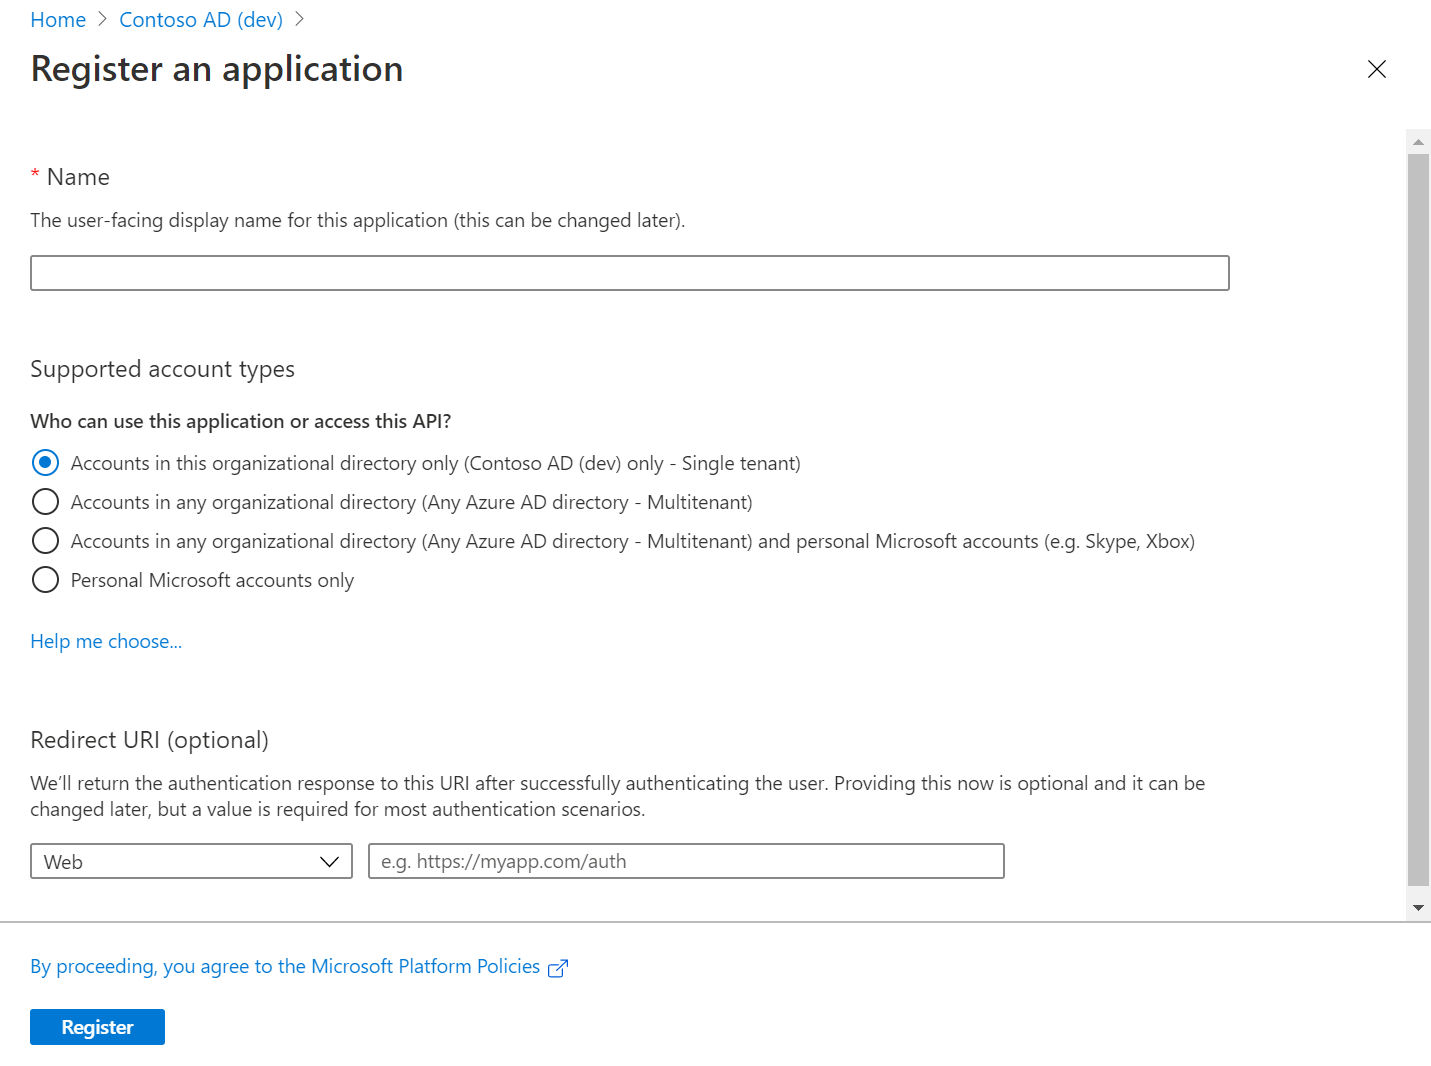 Screenshot of the Azure portal in a web browser, showing the Register an application pane.